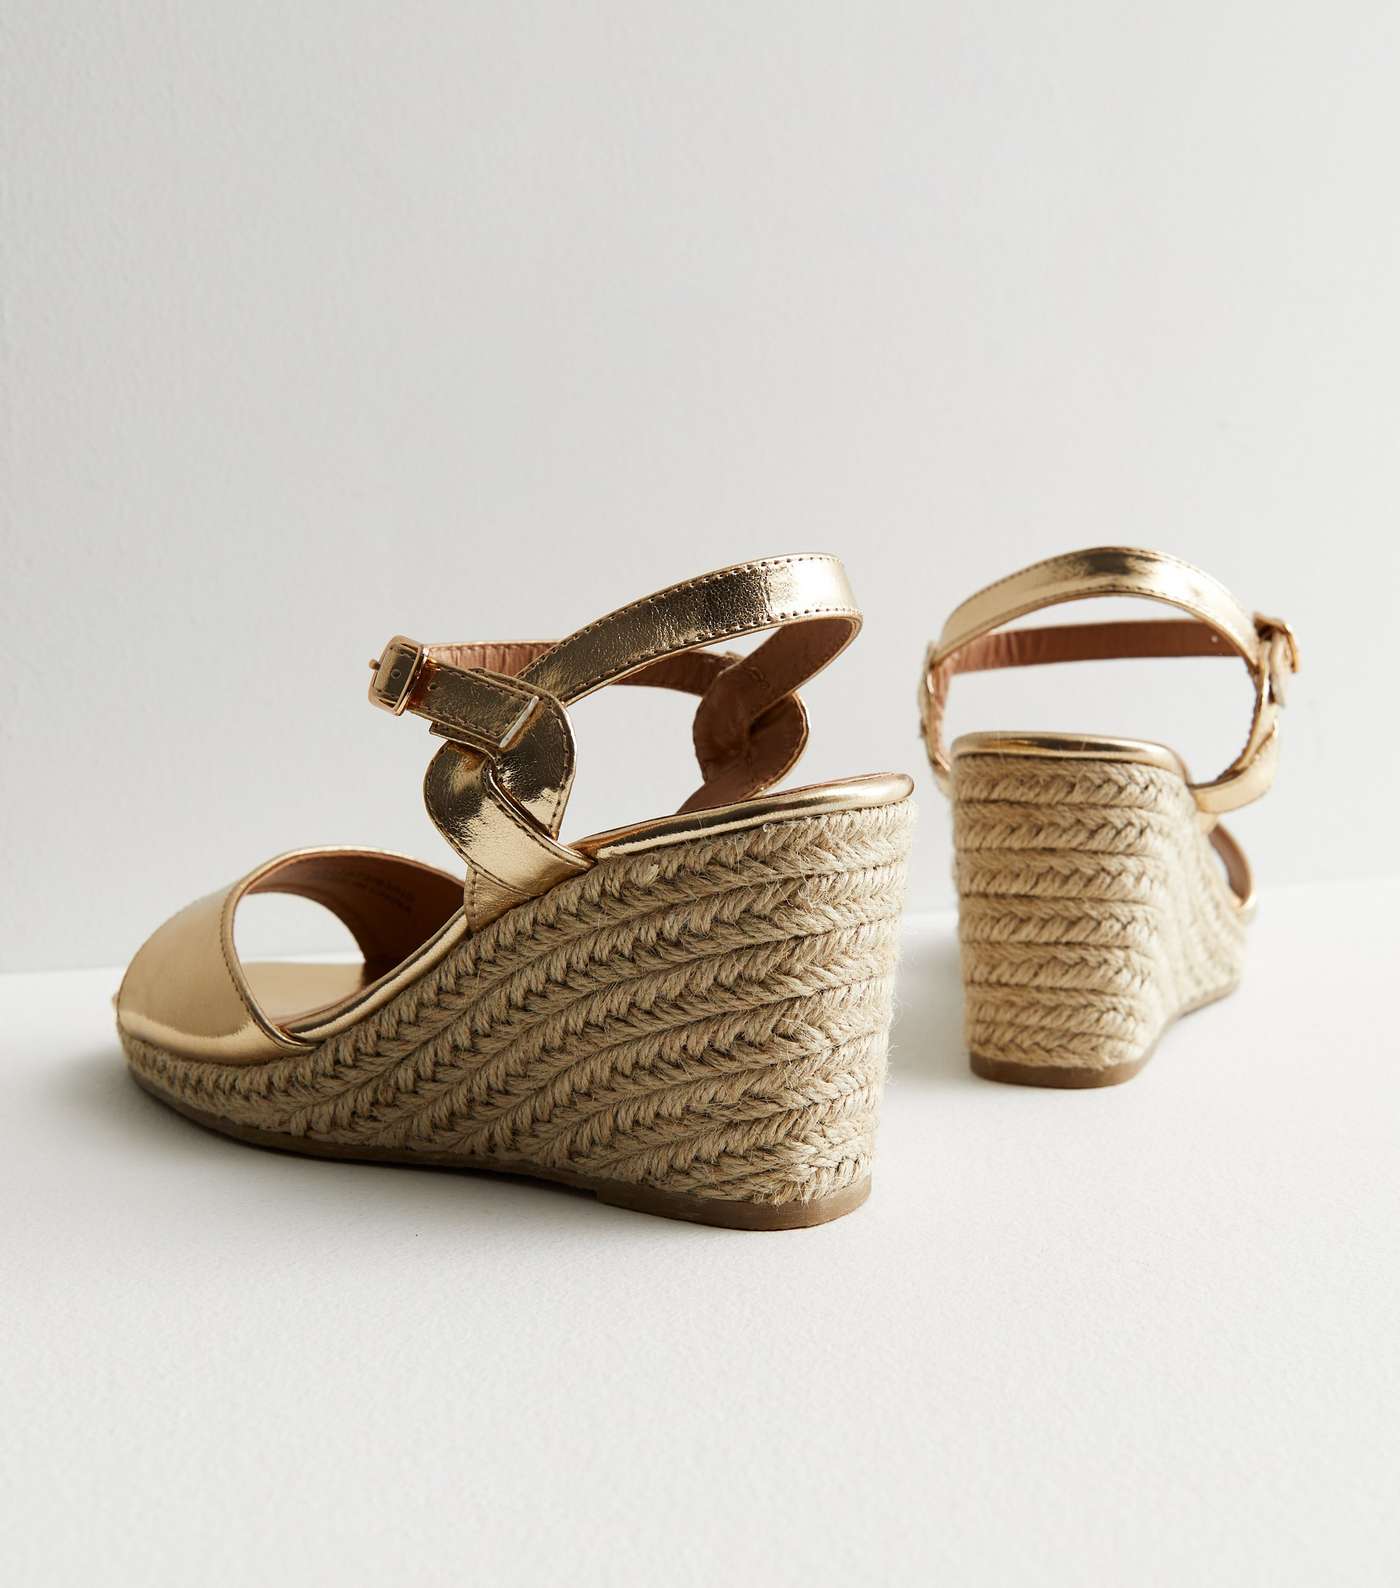 Extra Wide Fit Gold Metallic 2 Part Espadrille Wedge Sandals Image 4